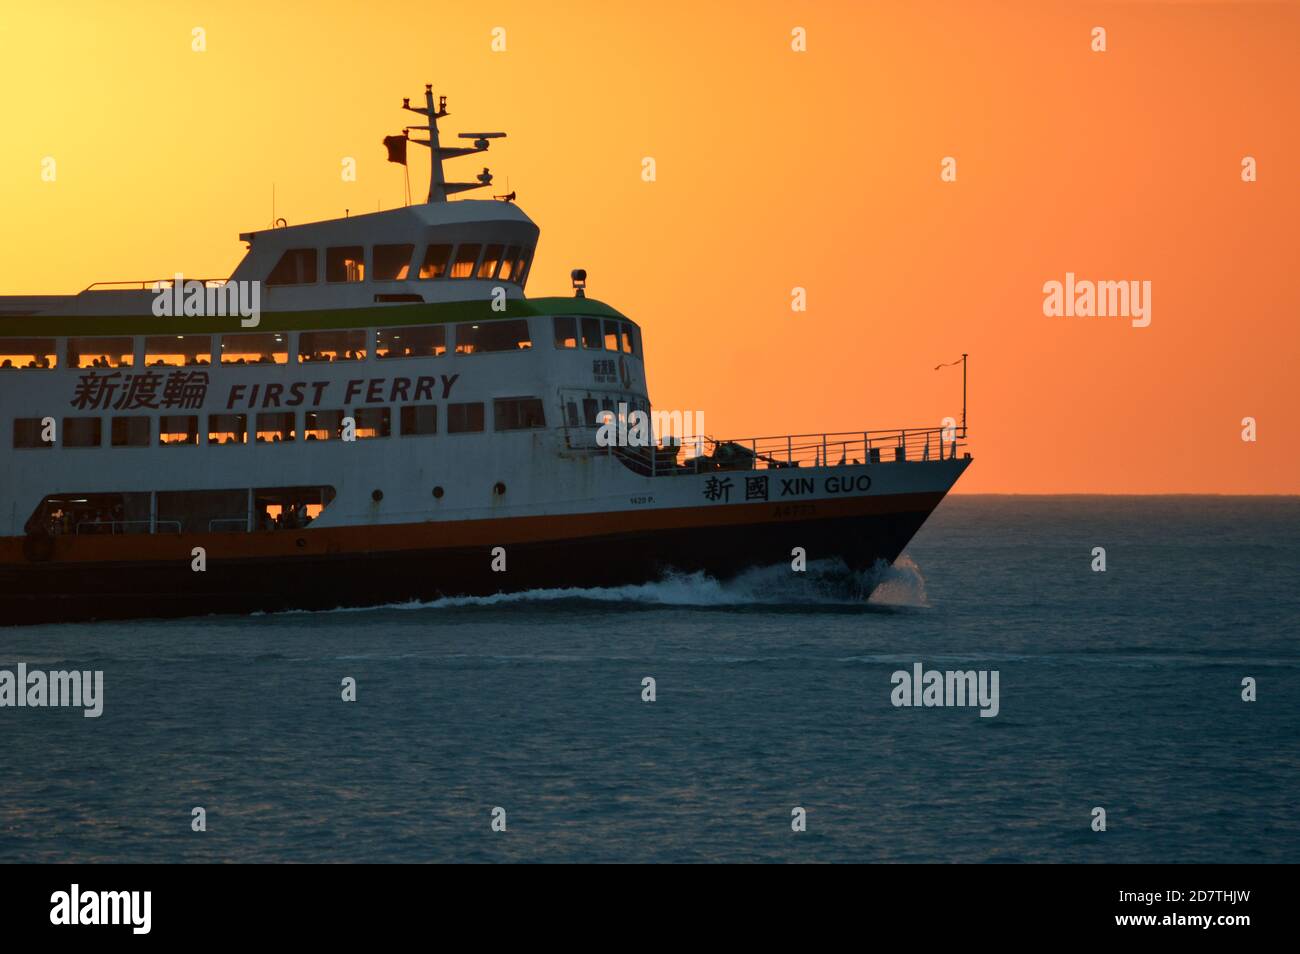 Triple-decker Hong Kong passenger vessel 'Xin Guo' of First Ferry, which serves the outlying island of Cheung Chau. Pictured departing Cheung Chau. Stock Photo